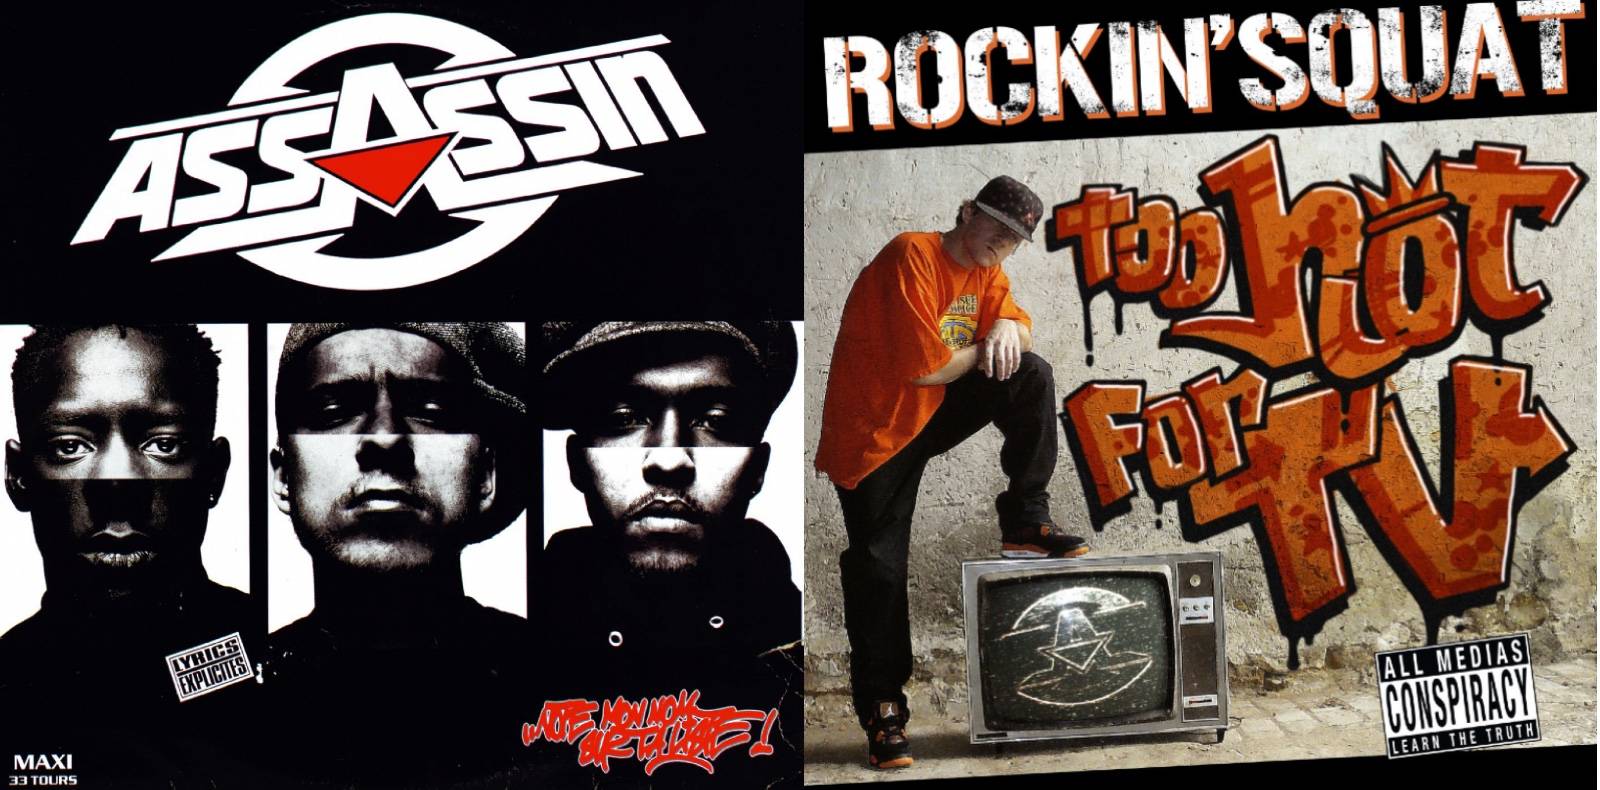 “Note mon nom sur ta liste” Assassin (1991) and “Too Hot for TV” by Rockin’Squat.